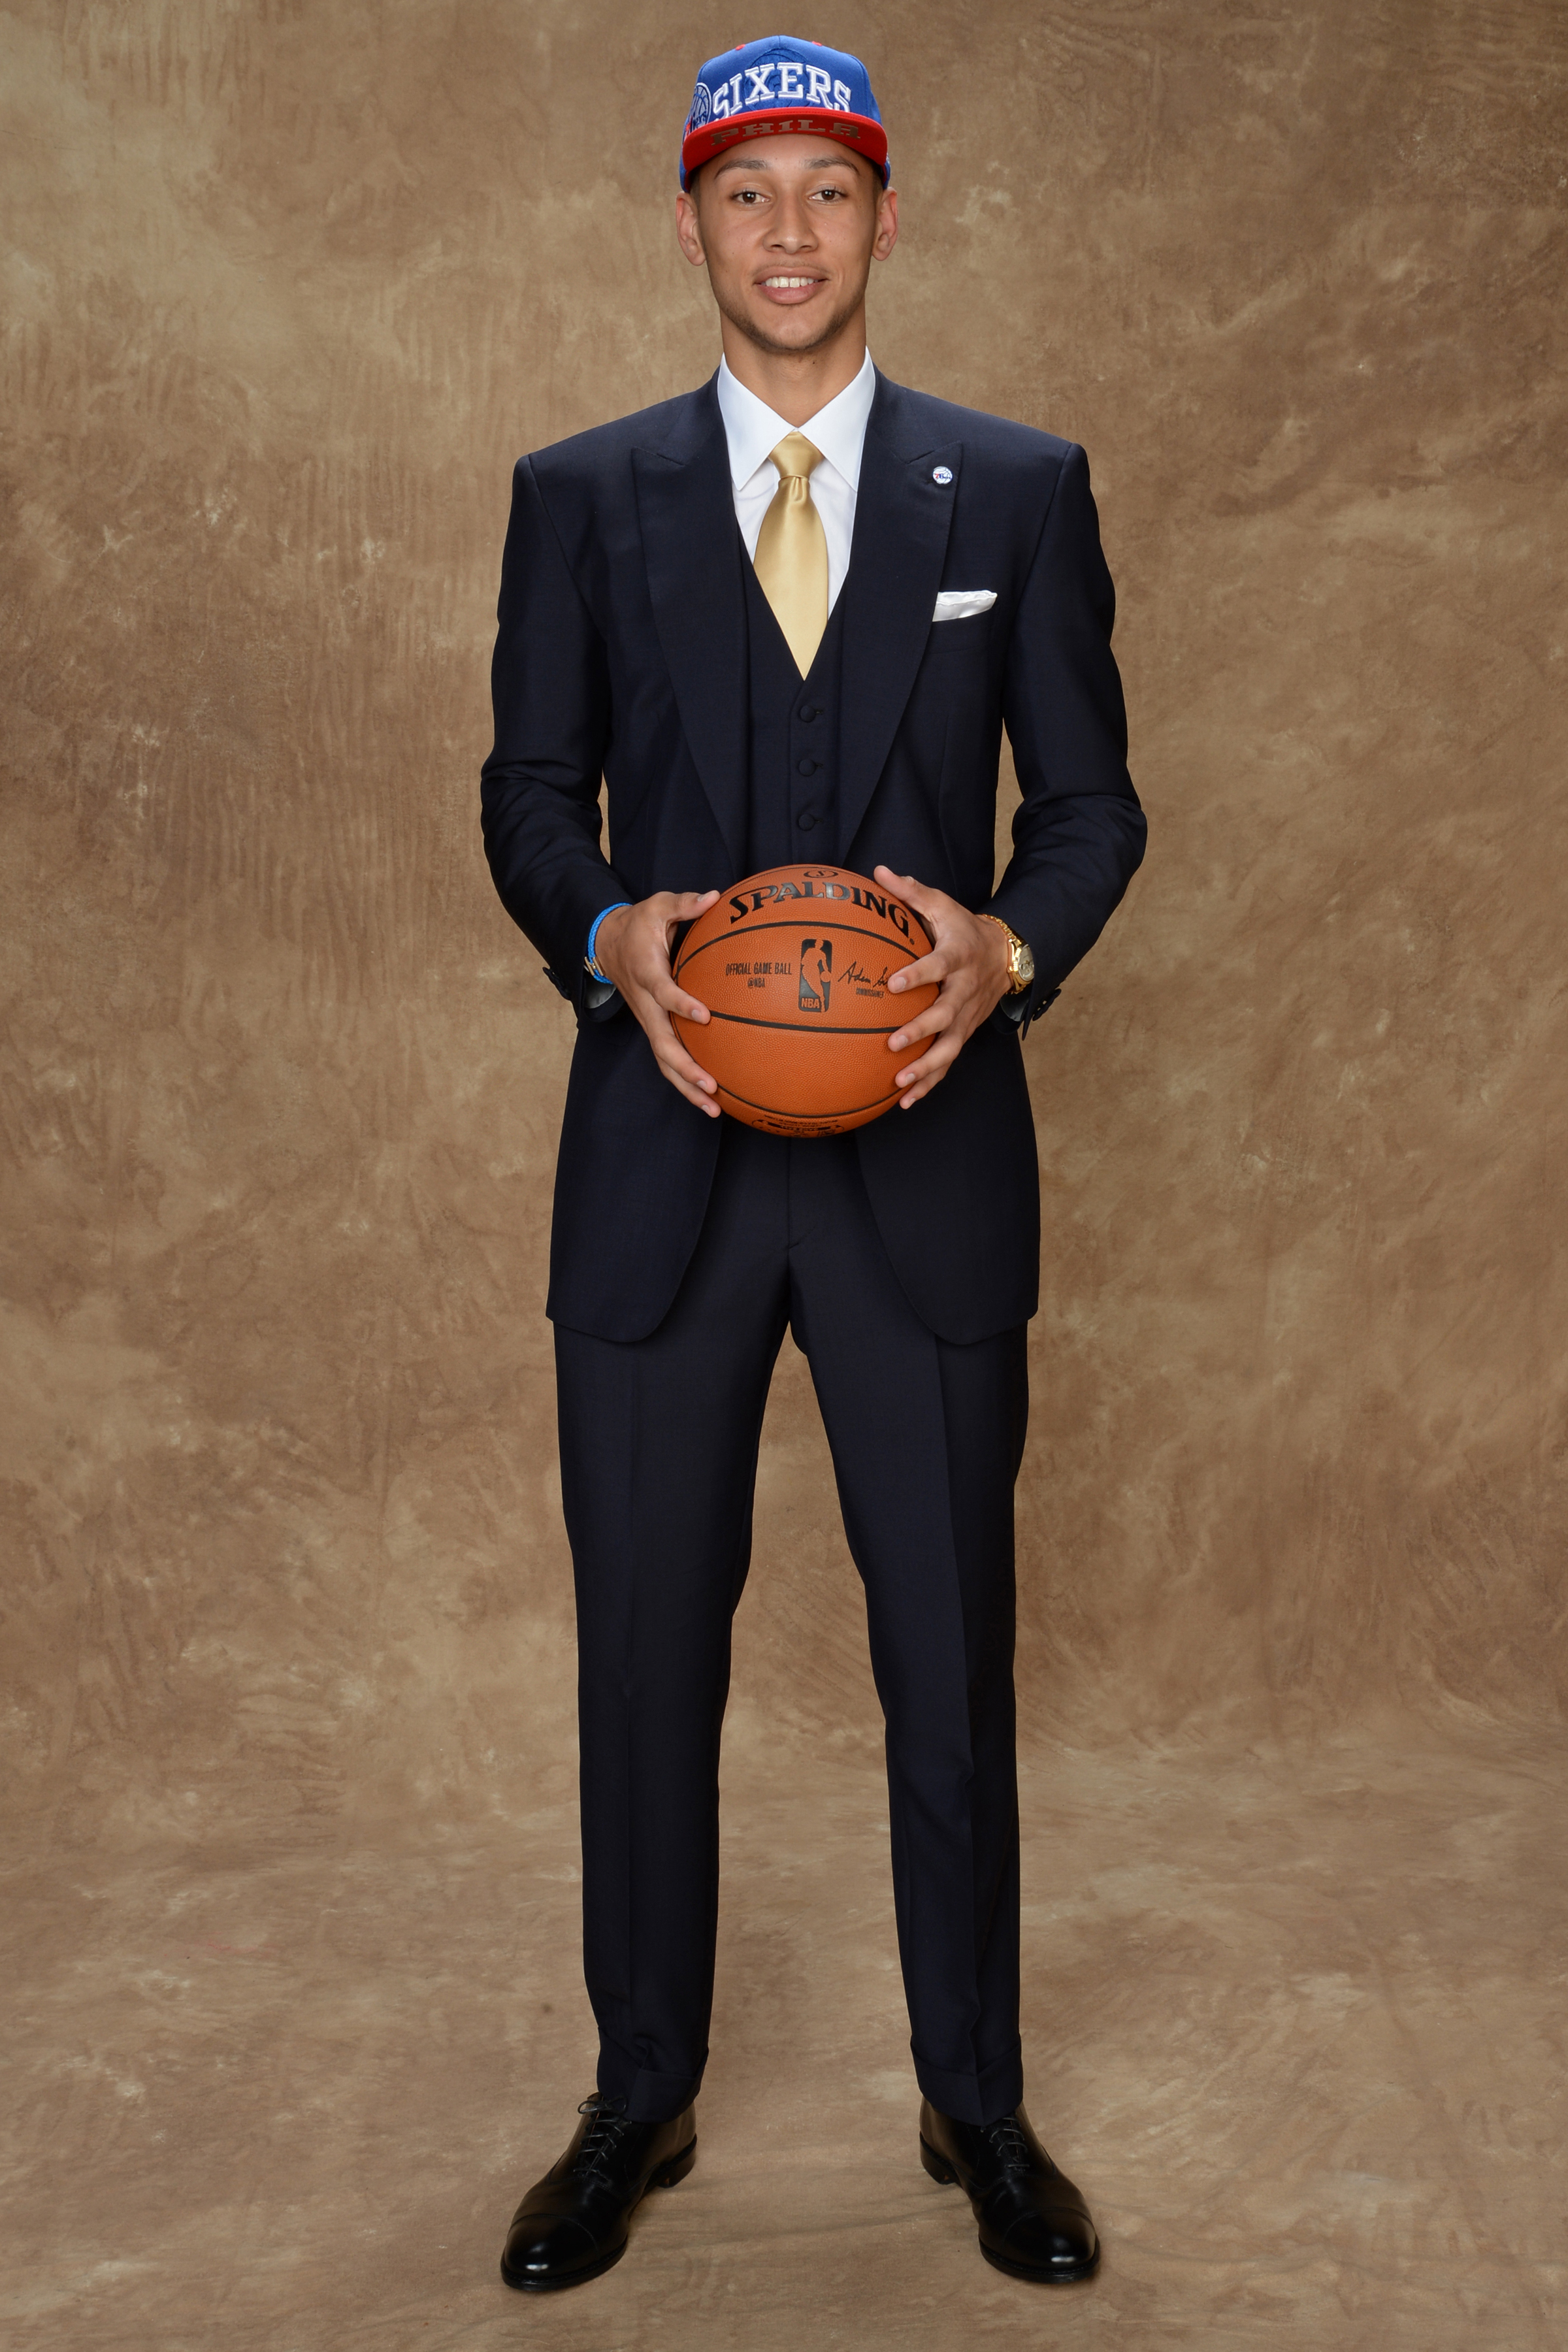 Ben Simmons was hailed as the number one pick in the draft, which was hardly diminished by his selection of a classic three piece suit.